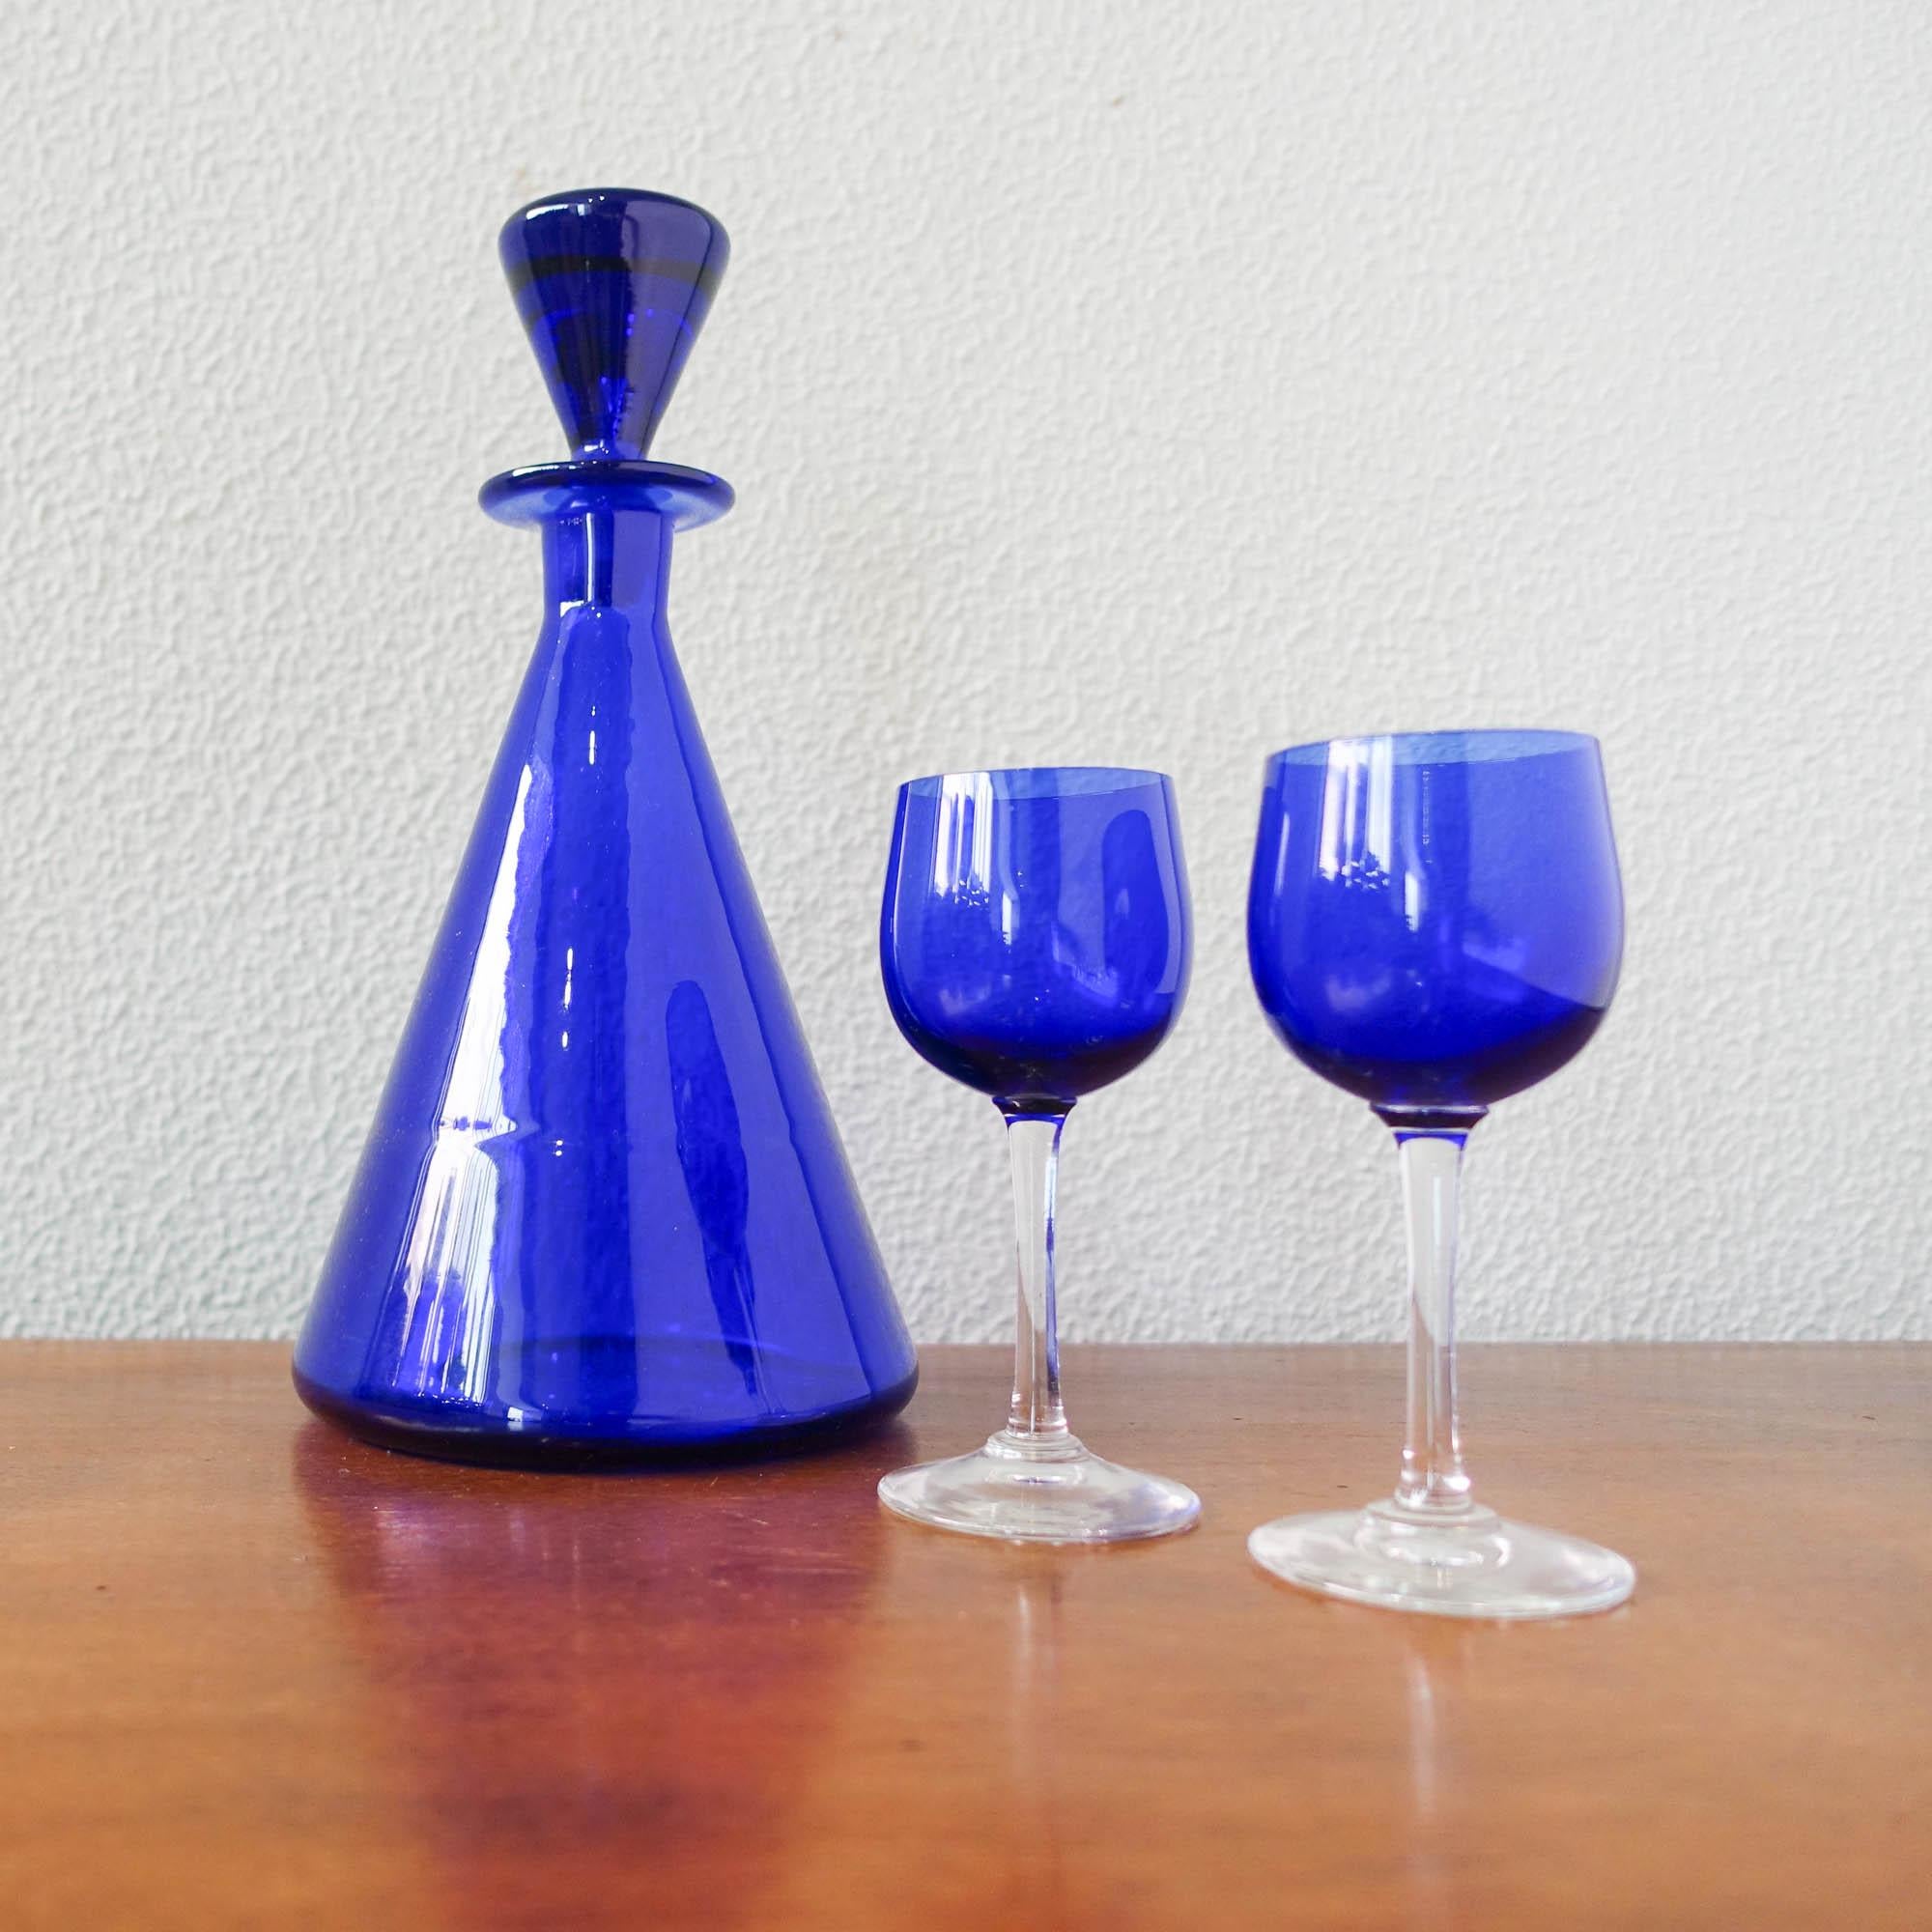 This set of bottle and two glasses was designed and produced by Marinha Grande, in Portugal, during the 1950's. The bottle is entirely made of cobalt blue glass, and the glasses are in cobalt blue with transparent base and stem. In original and good